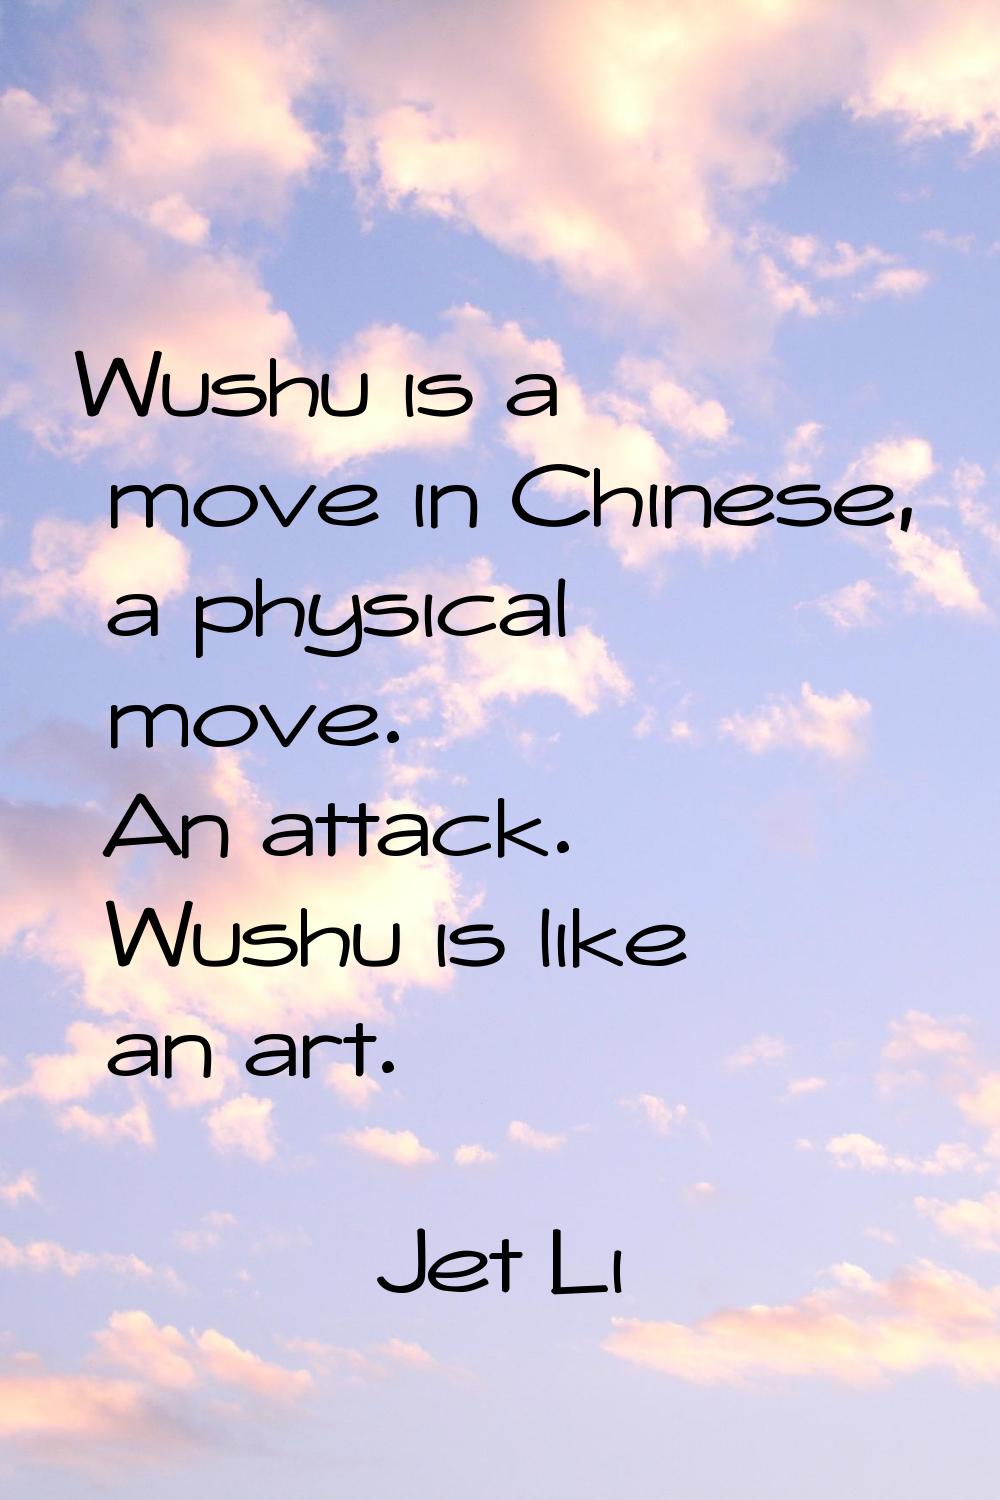 Wushu is a move in Chinese, a physical move. An attack. Wushu is like an art.